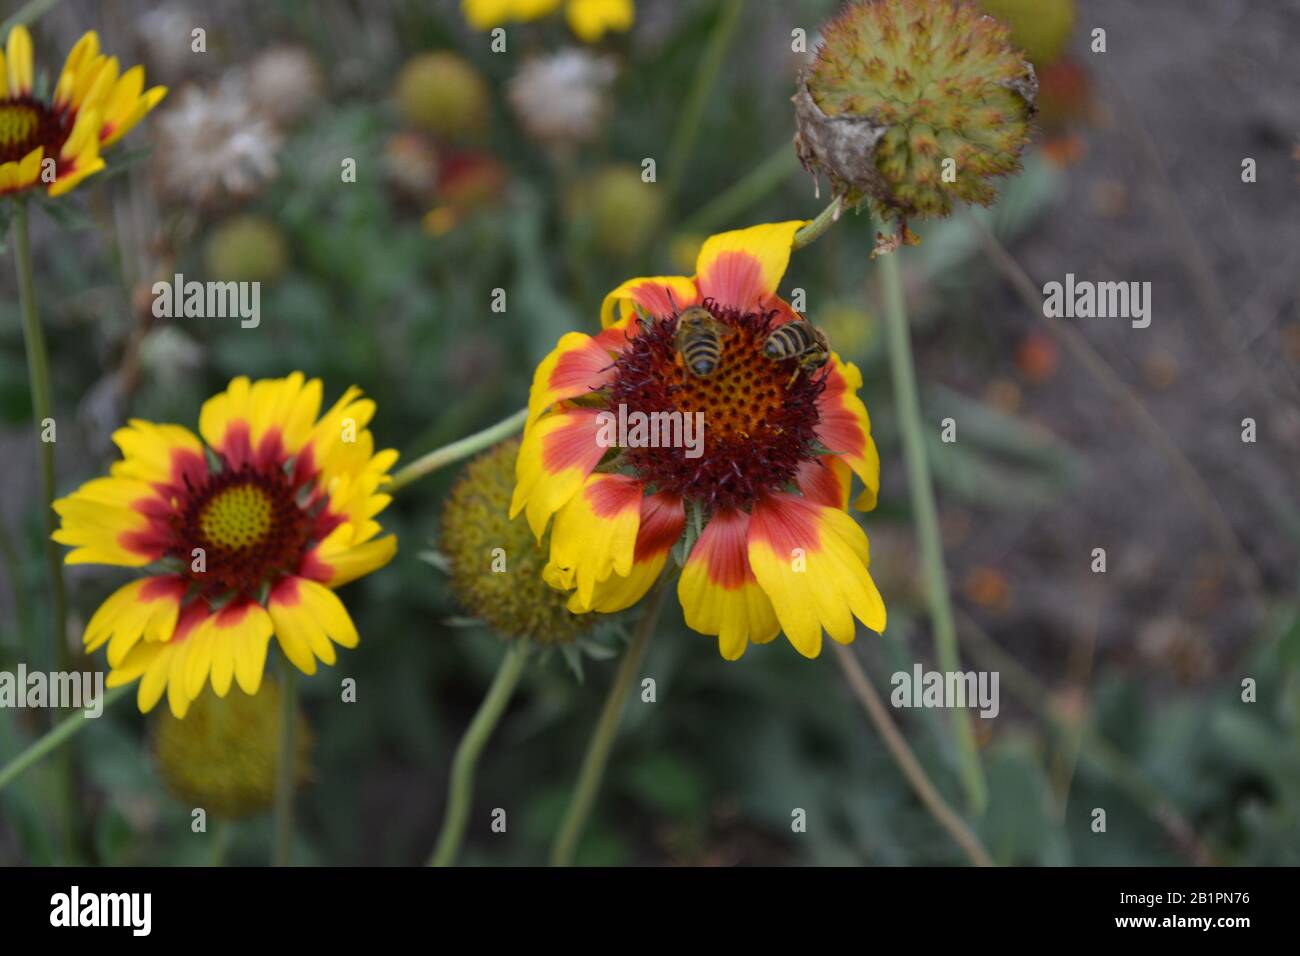 Gaillardia. G. hybrida Fanfare. A bee on a flower. Summer days. Flowerbed with flowers. Green leaves. Horizontal Stock Photo